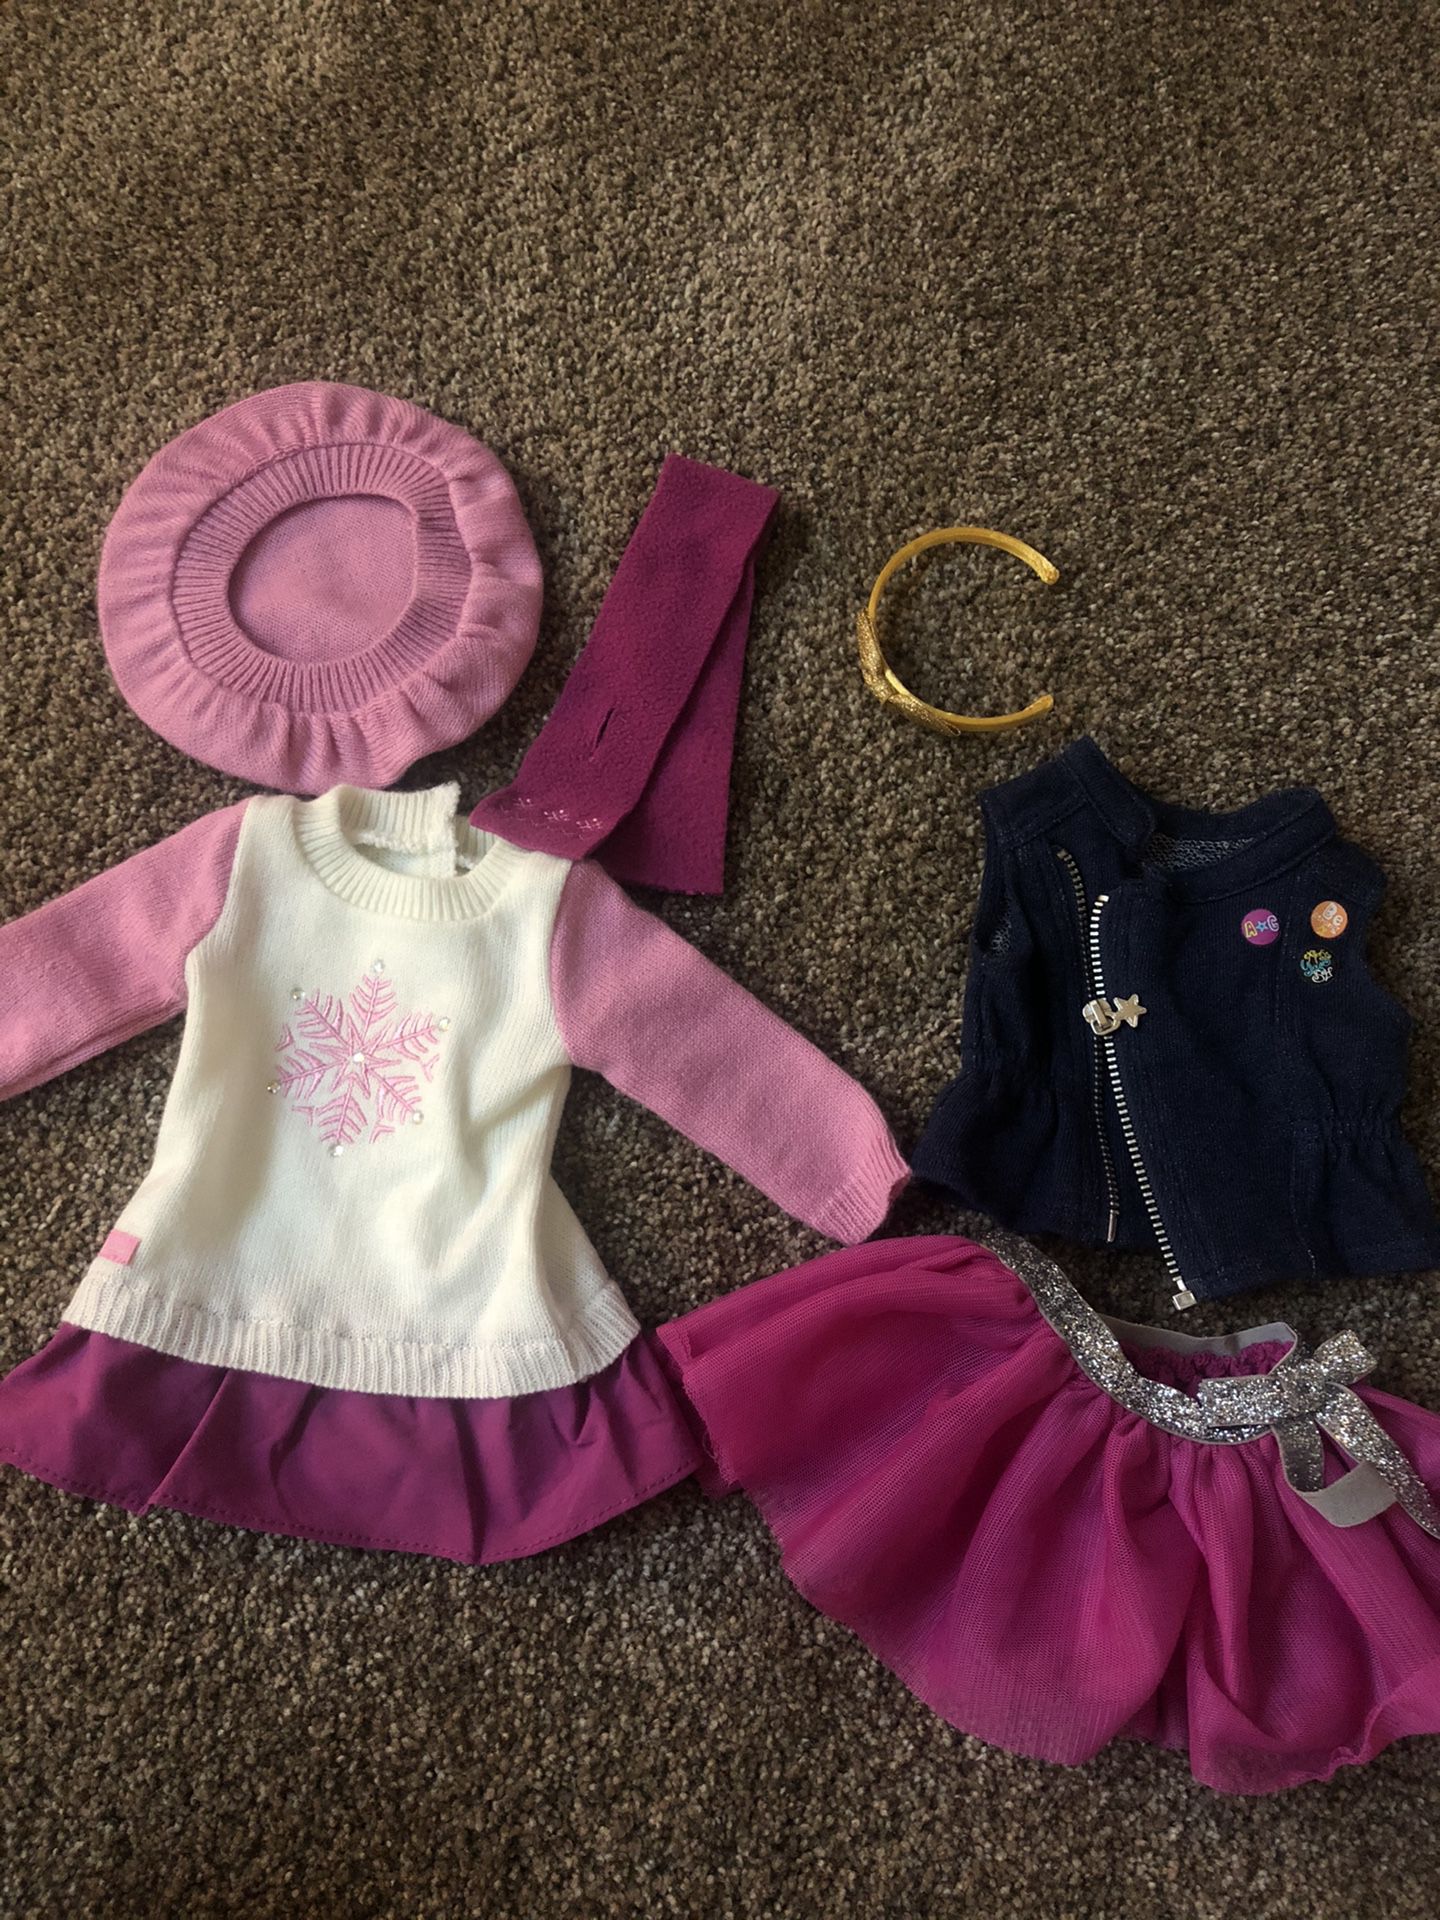 Authentic American Girl Doll Outfits